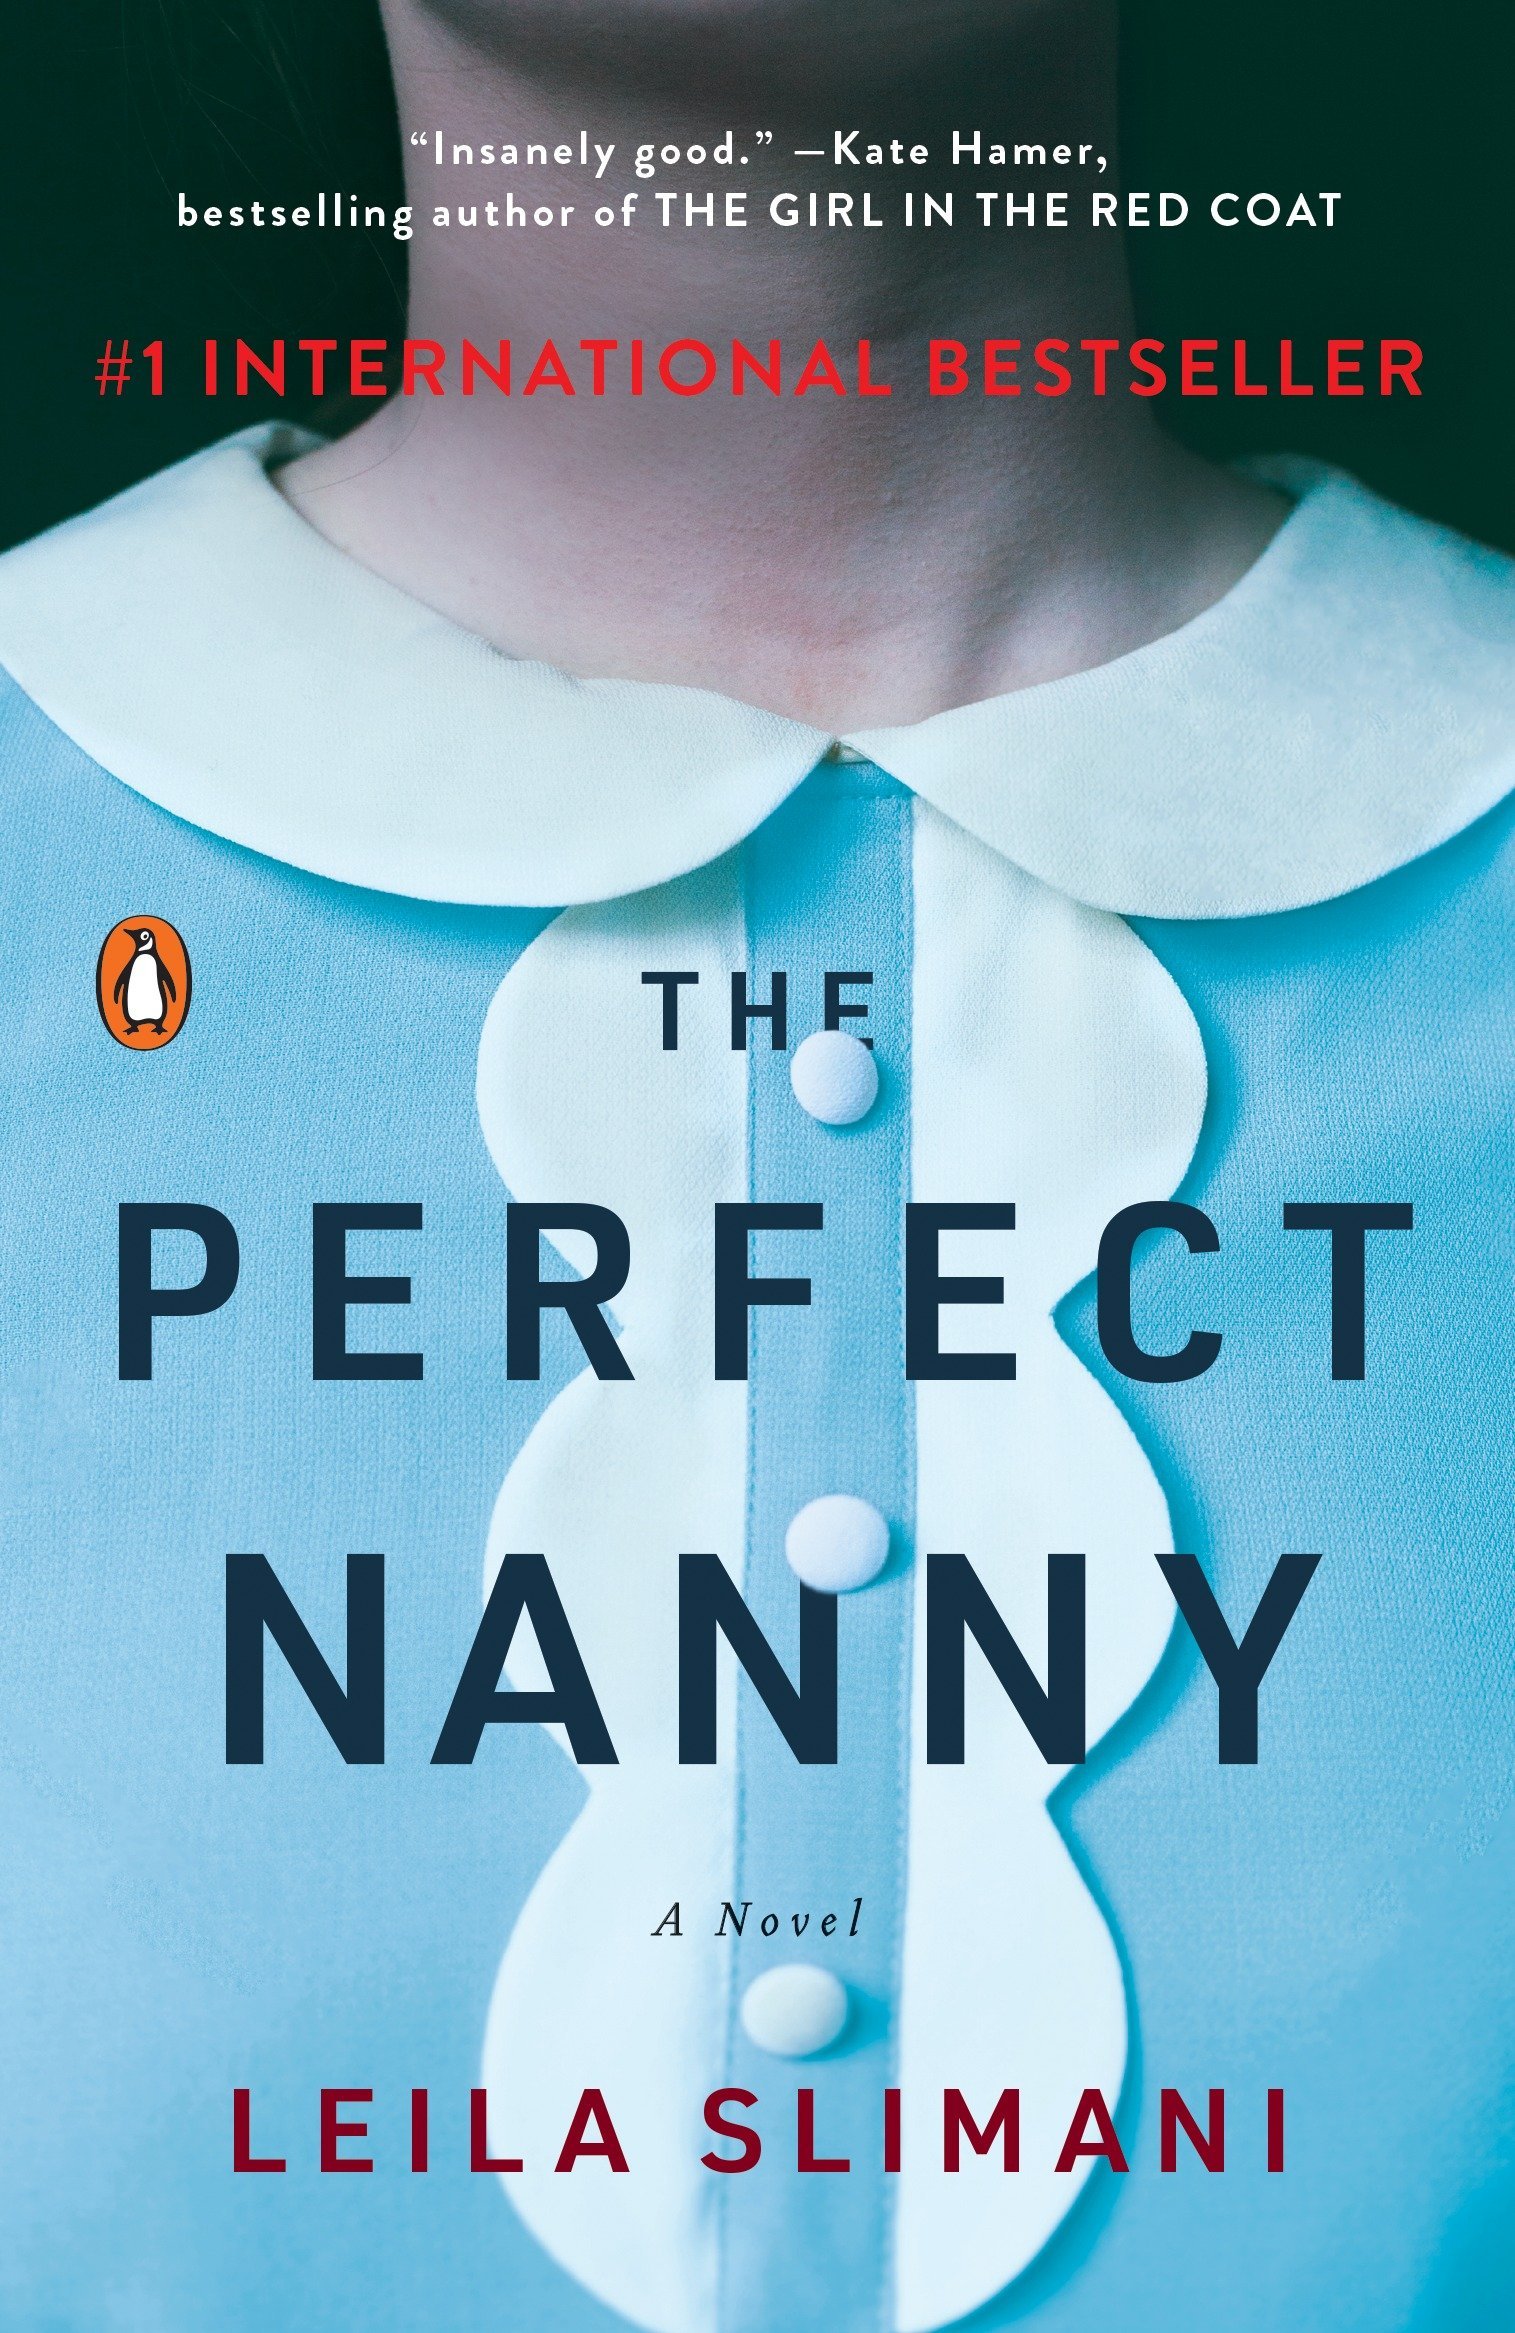 A book cover for The Perfect Nanny